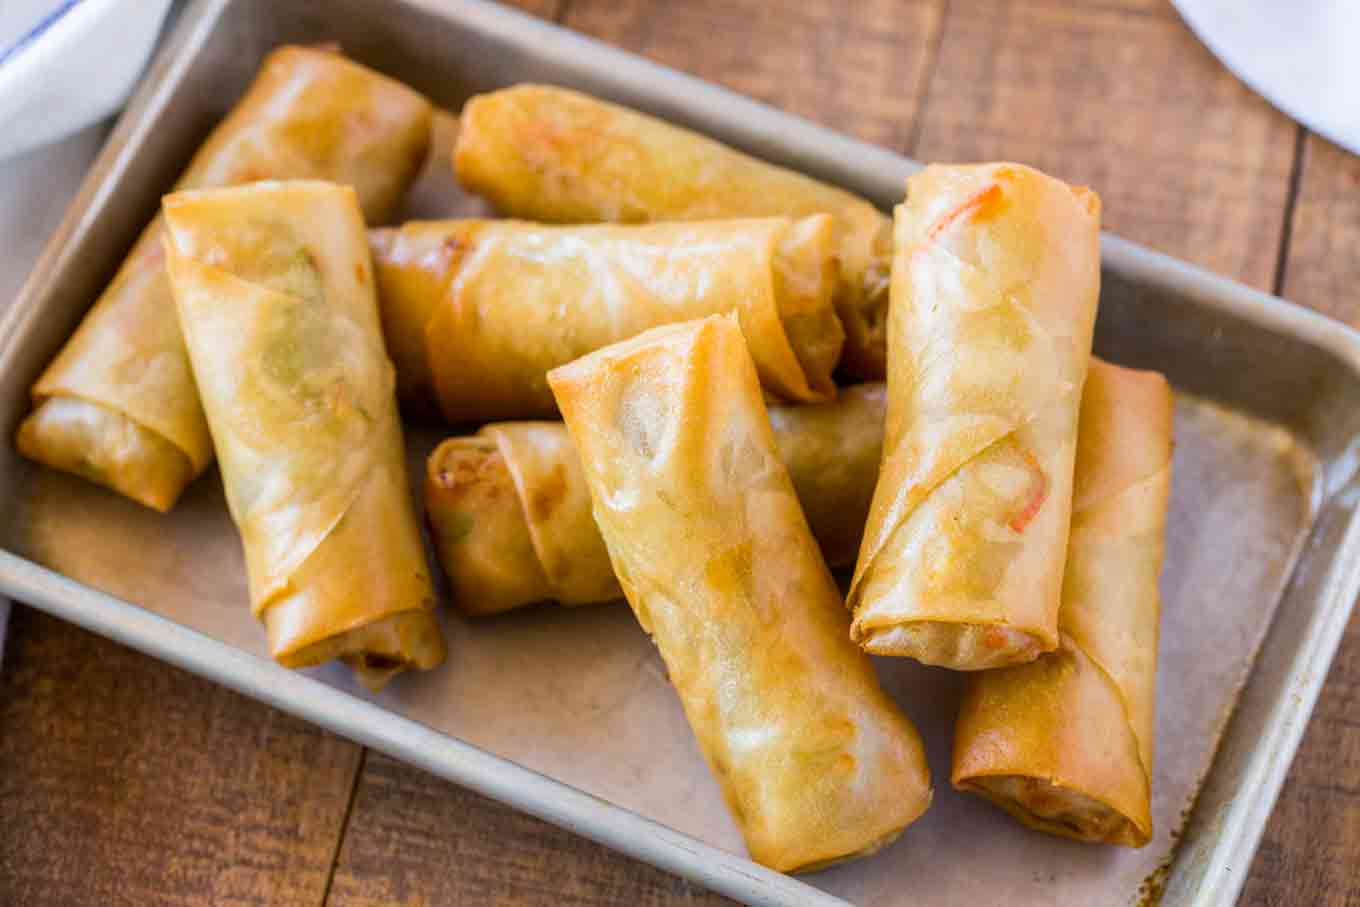 Can I Guess Mood You Are in RN by Foods You Wanna Have? Quiz Spring Rolls